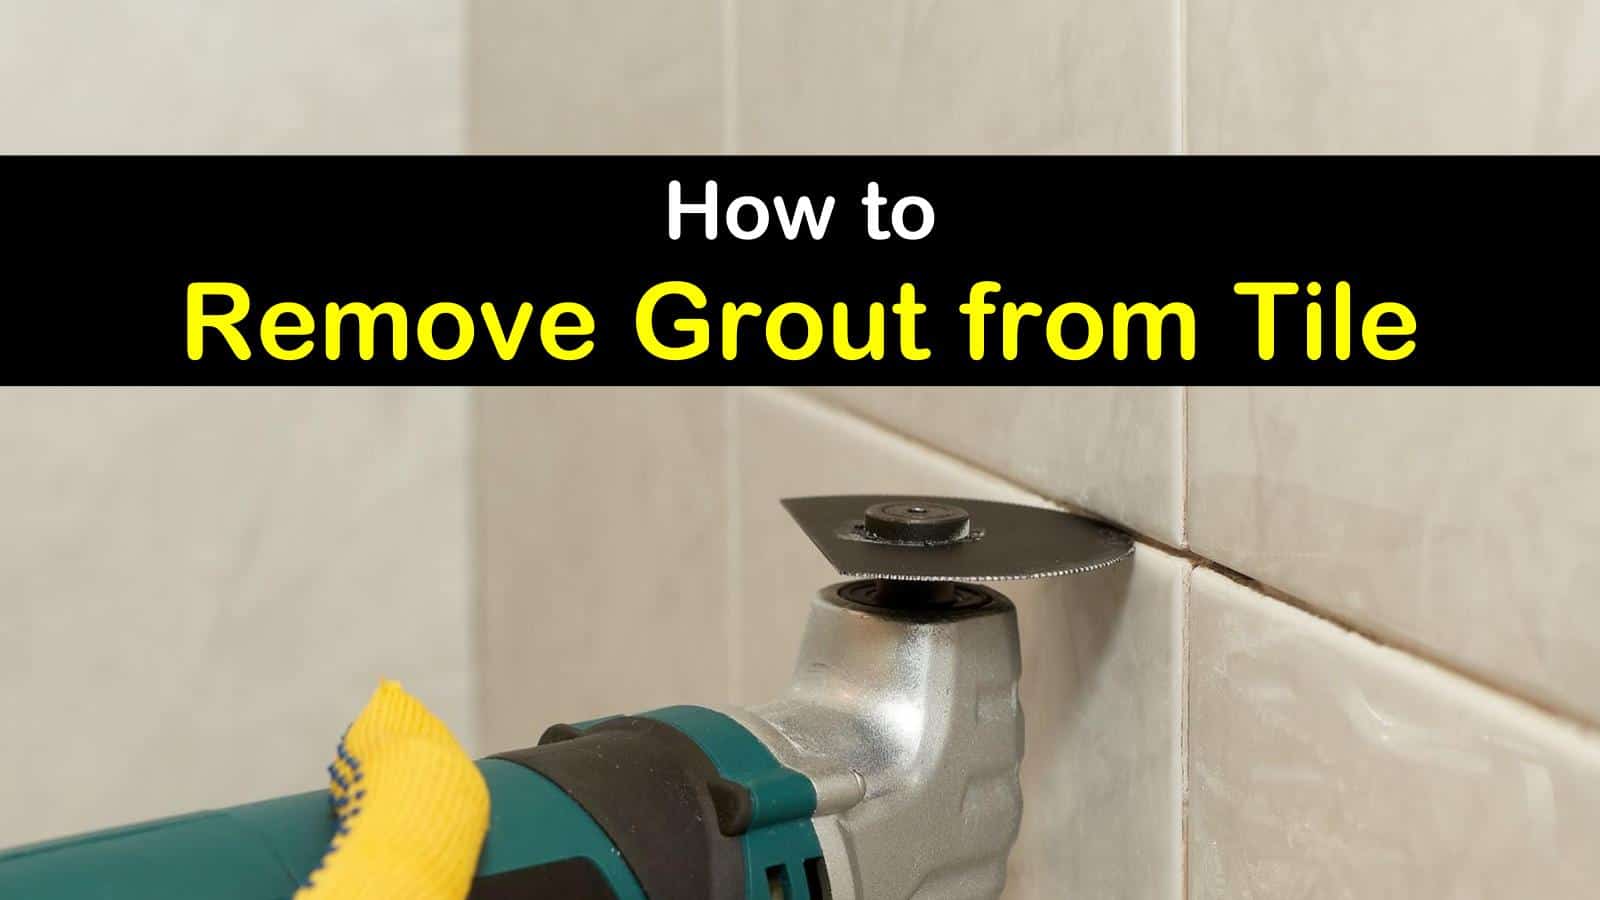 8 Crafty Ways To Remove Grout From Tile, How Do You Clean Grout Off Tile Once It Has Dried